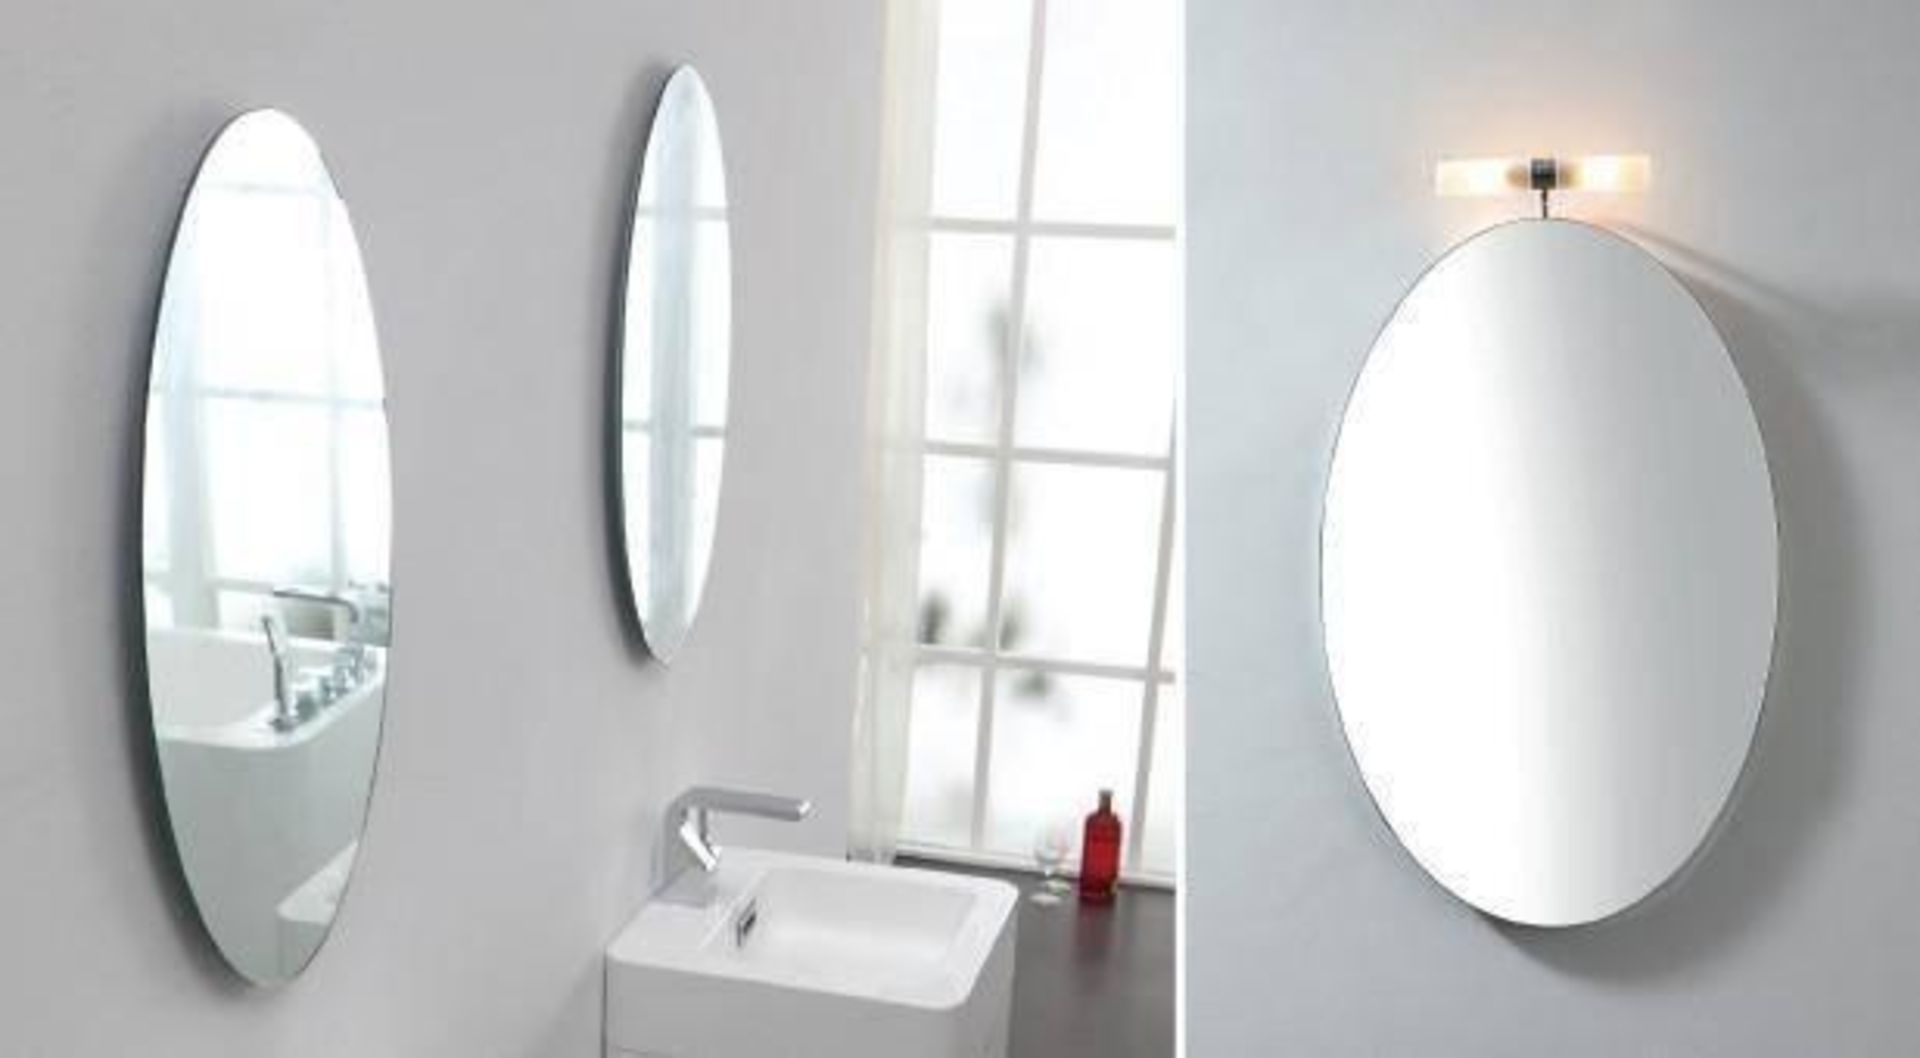 1 x Stylish Bathroom Oval Mirror 45 with top light - A-Grade - Ref:AMR14-045 - CL170 - Location: Not - Image 2 of 4